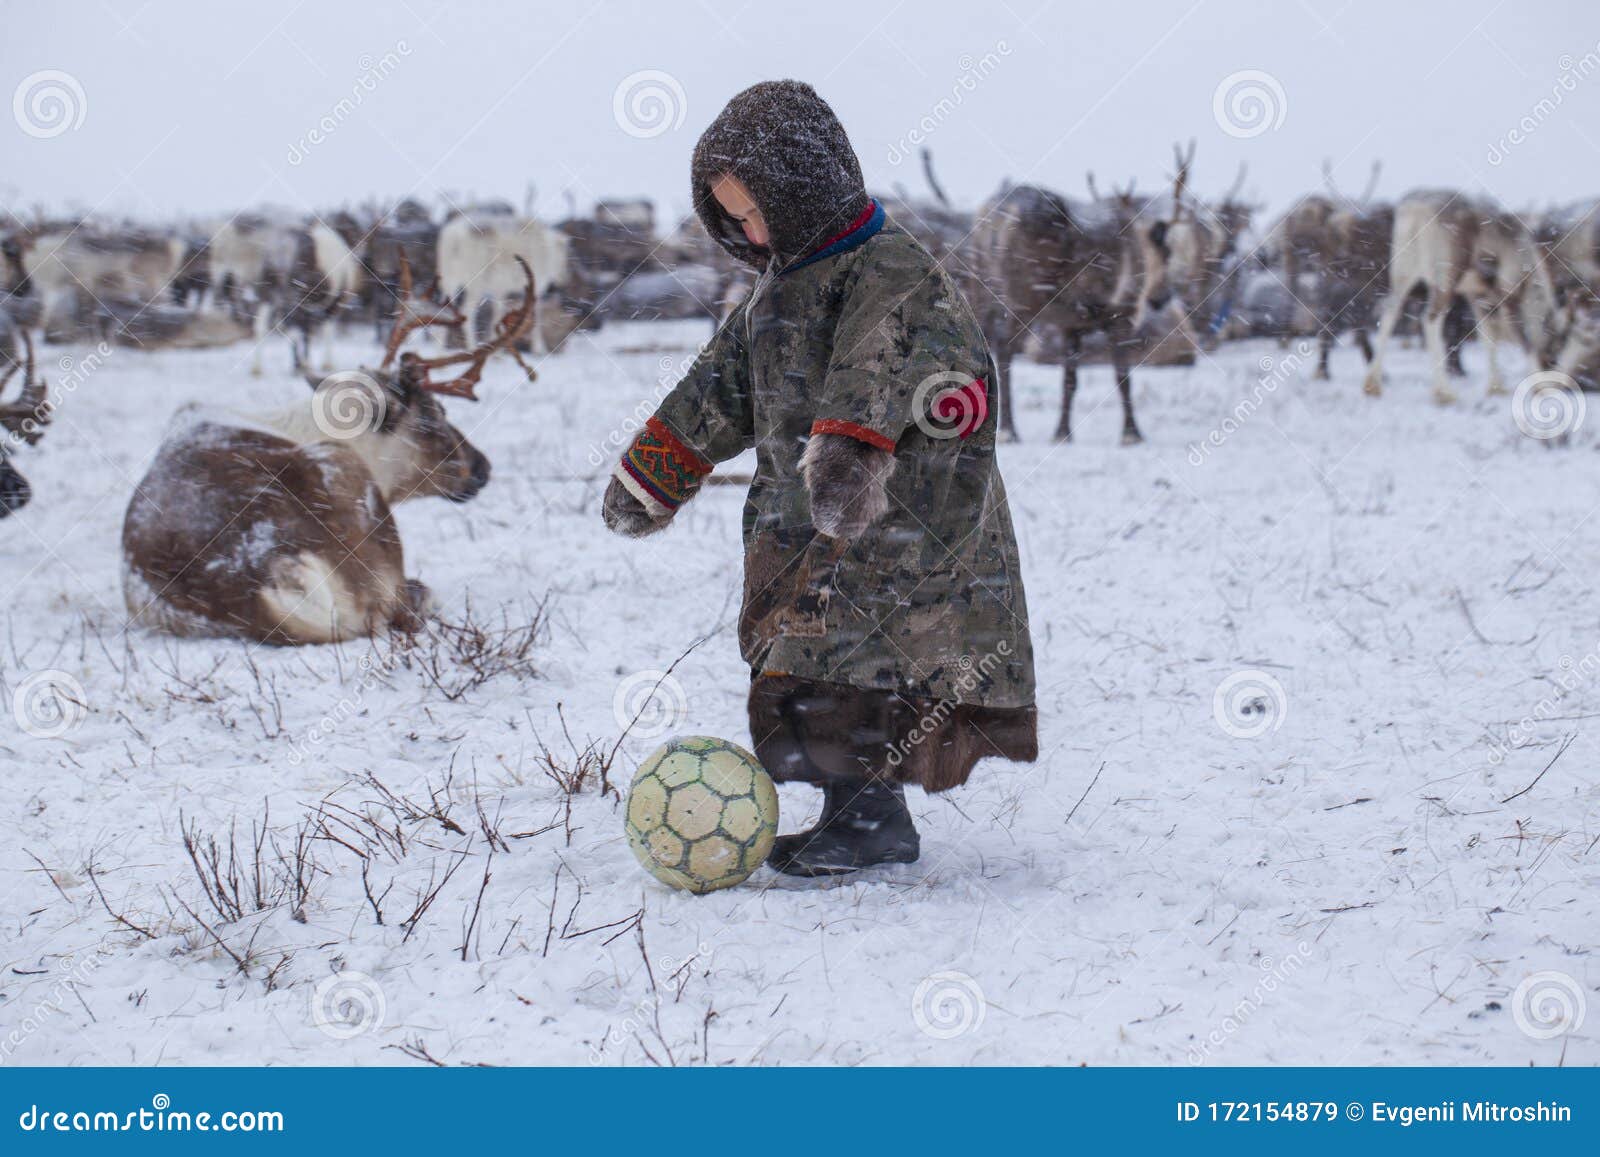 the yamal peninsula. reindeer with a young reindeer herder. happy boy on reindeer herder pasture playing with a ball in winter